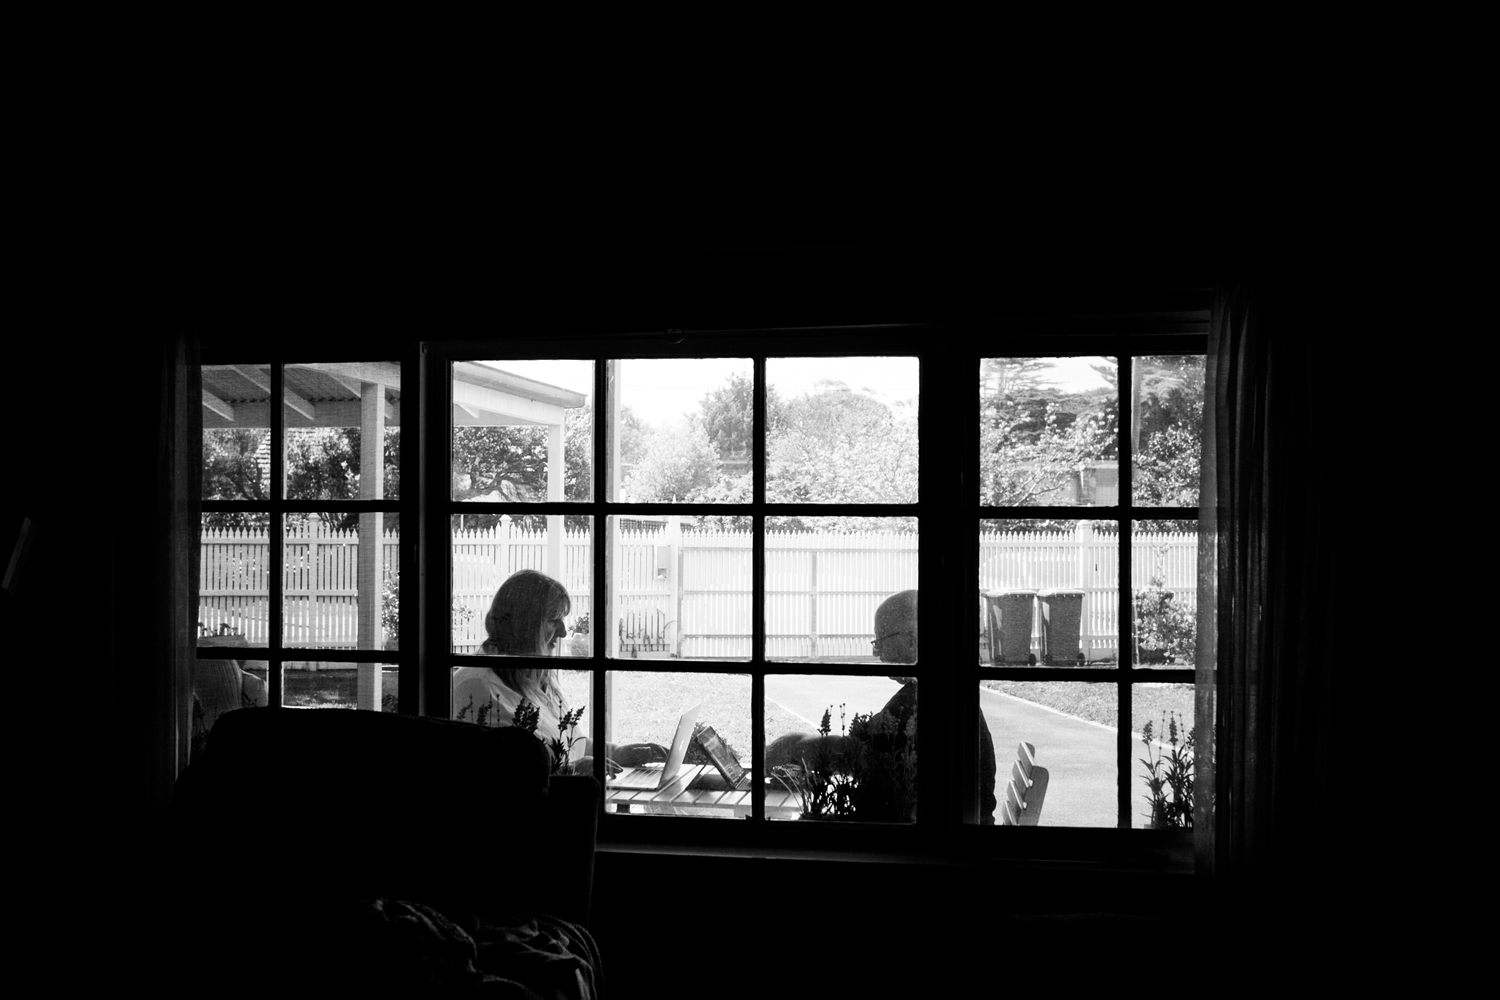 Black and white digital photograph of an interior window revealing a couple sitting outside at a table working on laptops.